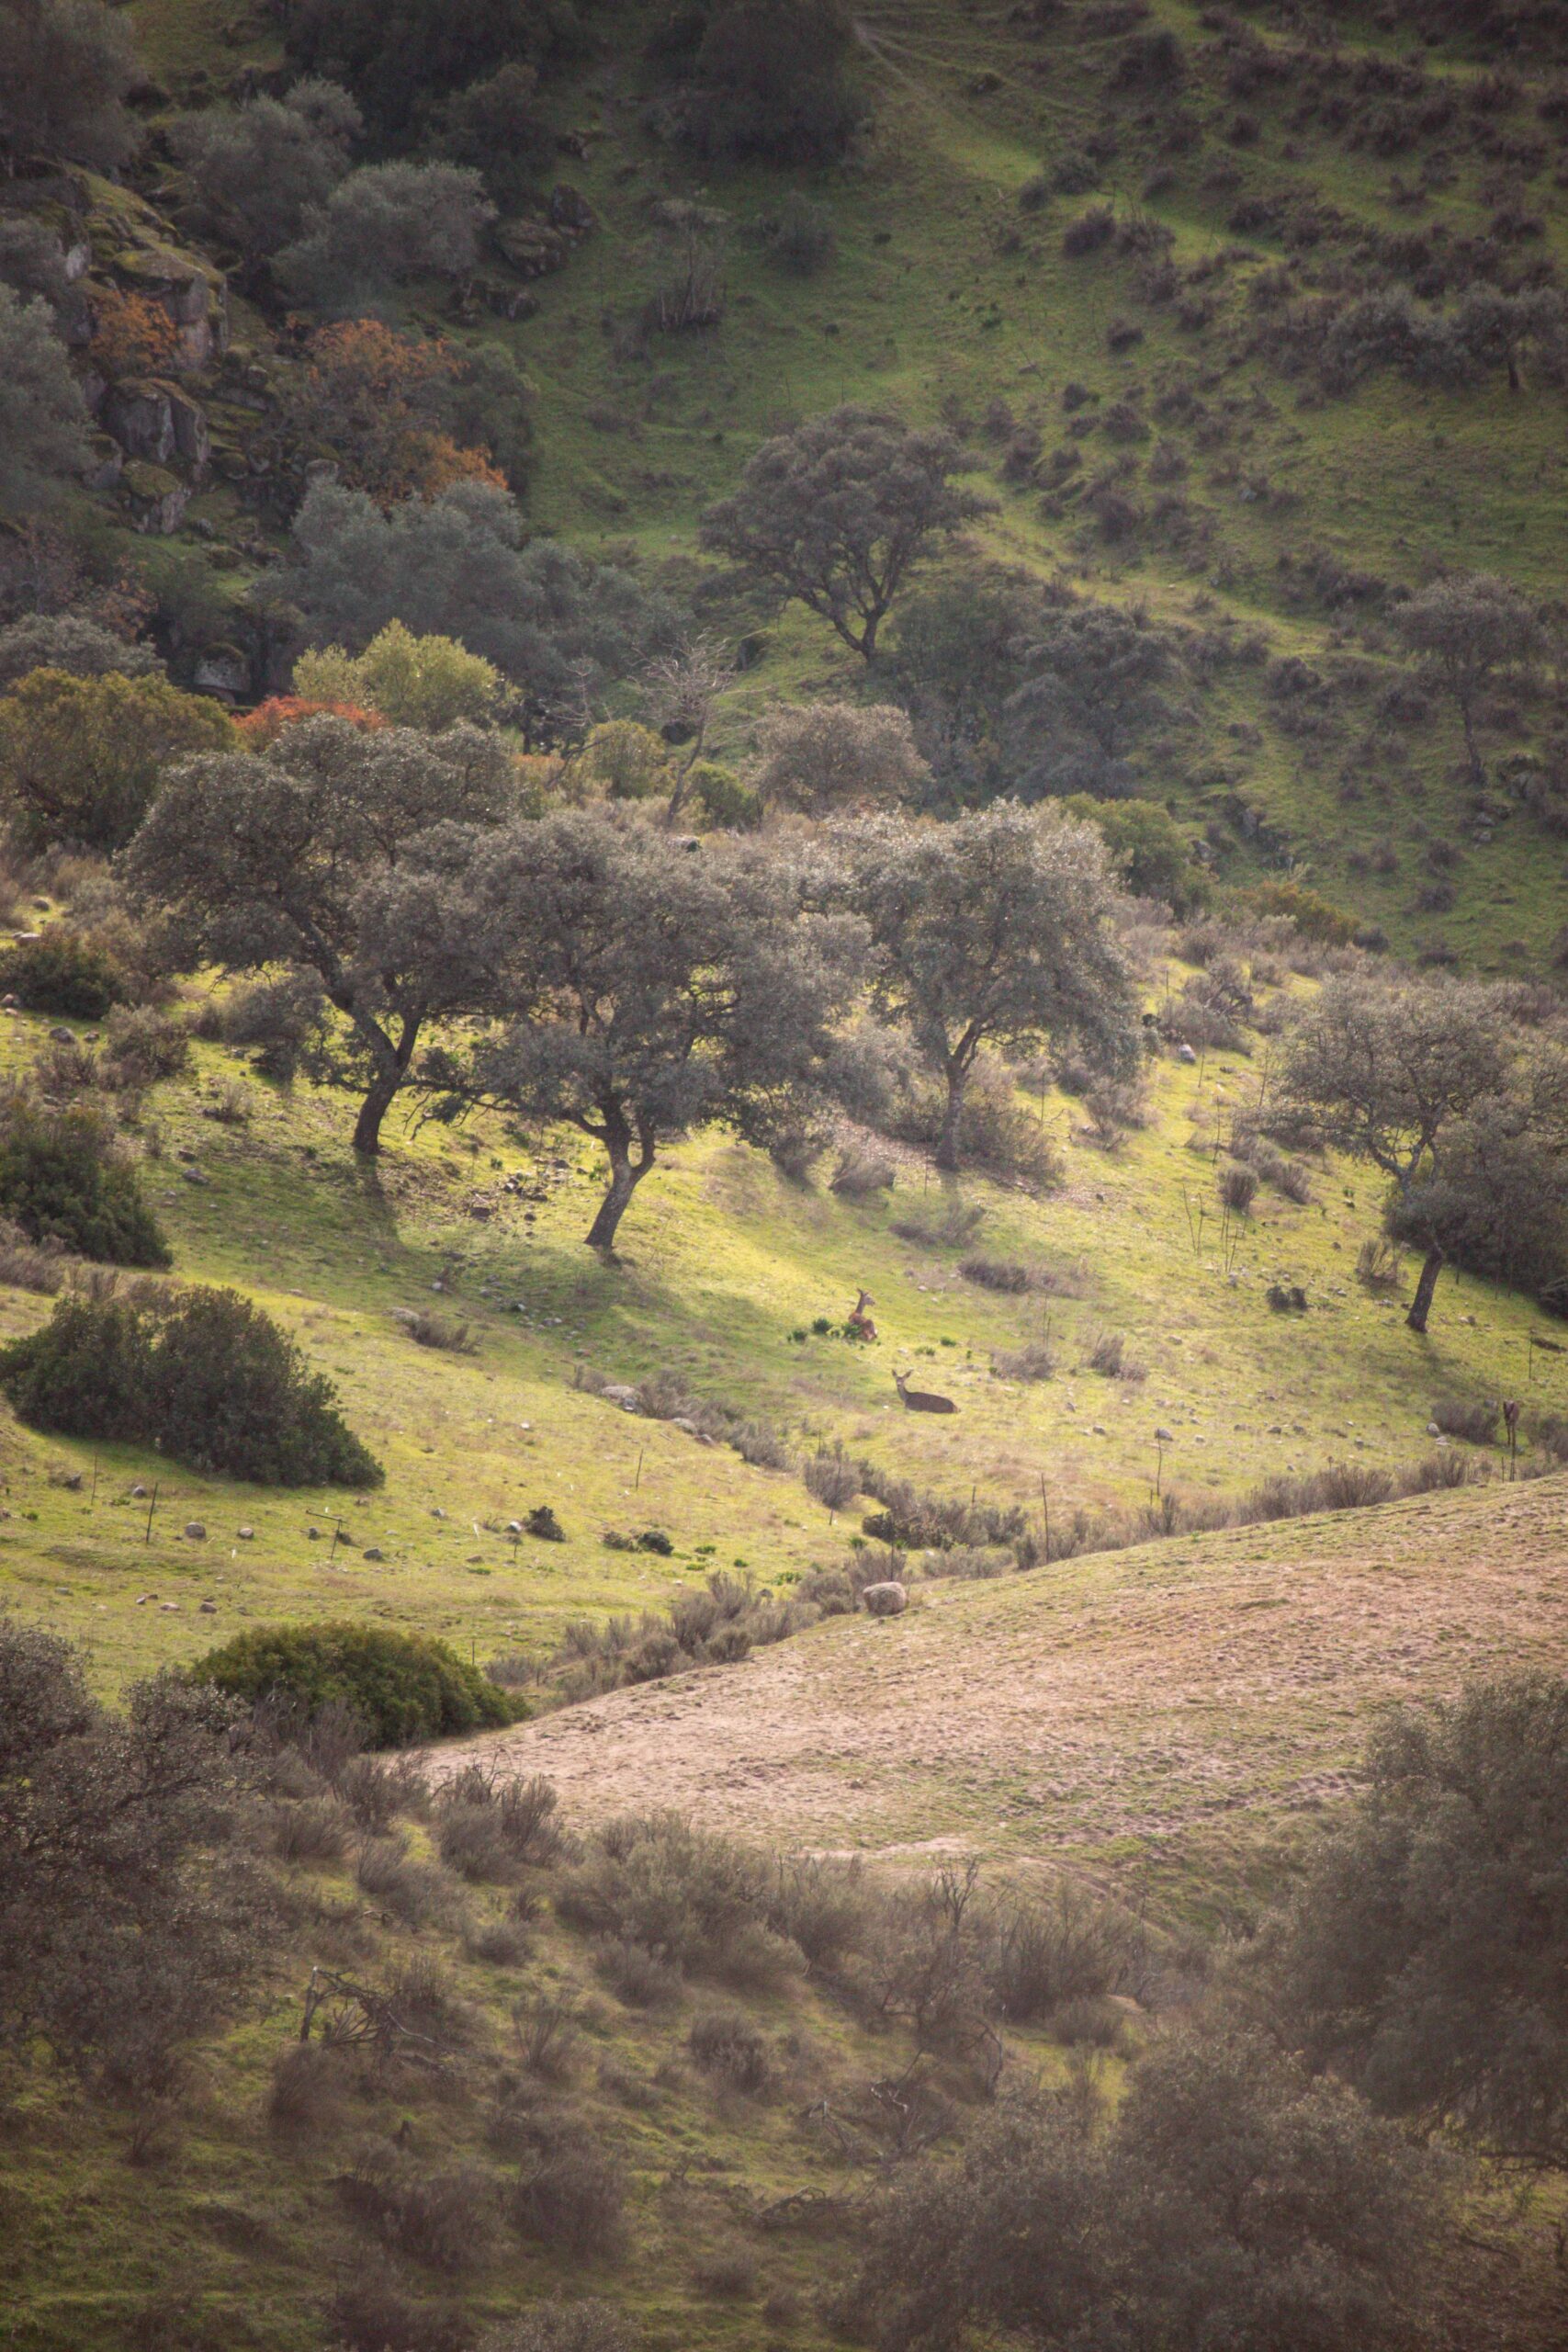 Two deers in the distance resting in a valley of Andújar Natural Park, Provincia de Jaén, Andalusia, Spain